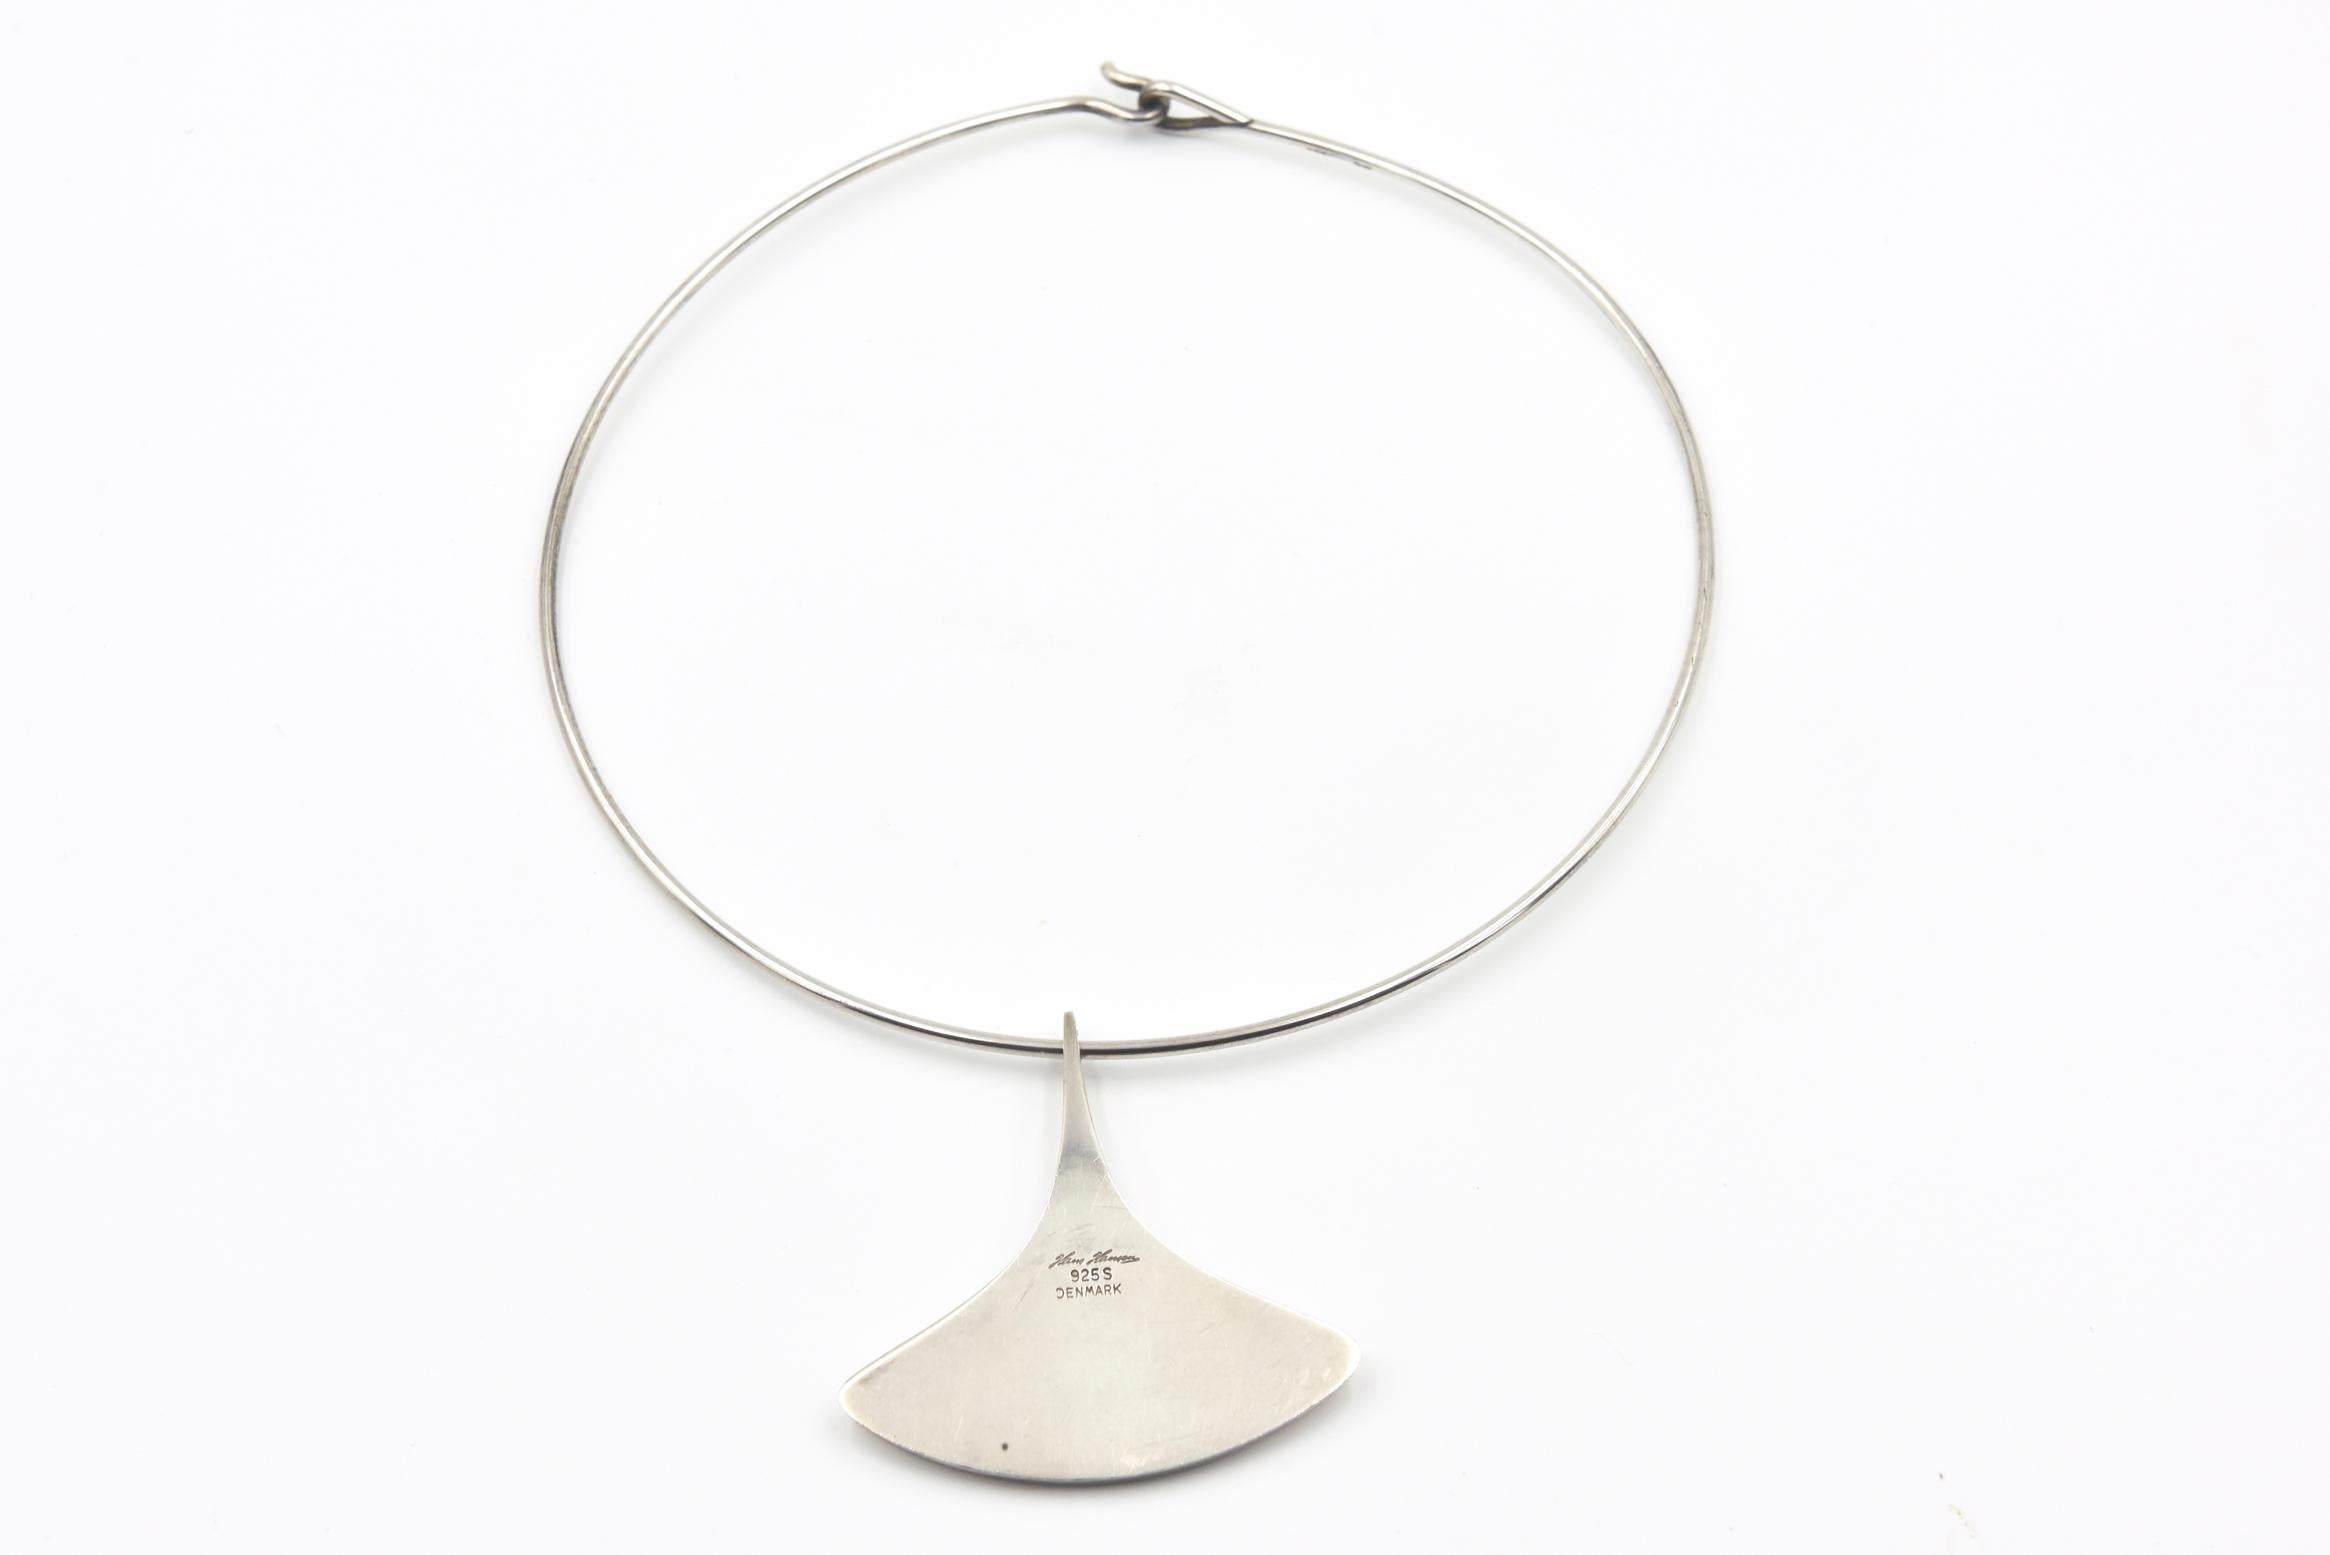 Modernist Hans Hansen Enamel and Sterling Silver Pendant Necklace by Karl Gustav In Good Condition For Sale In Miami Beach, FL